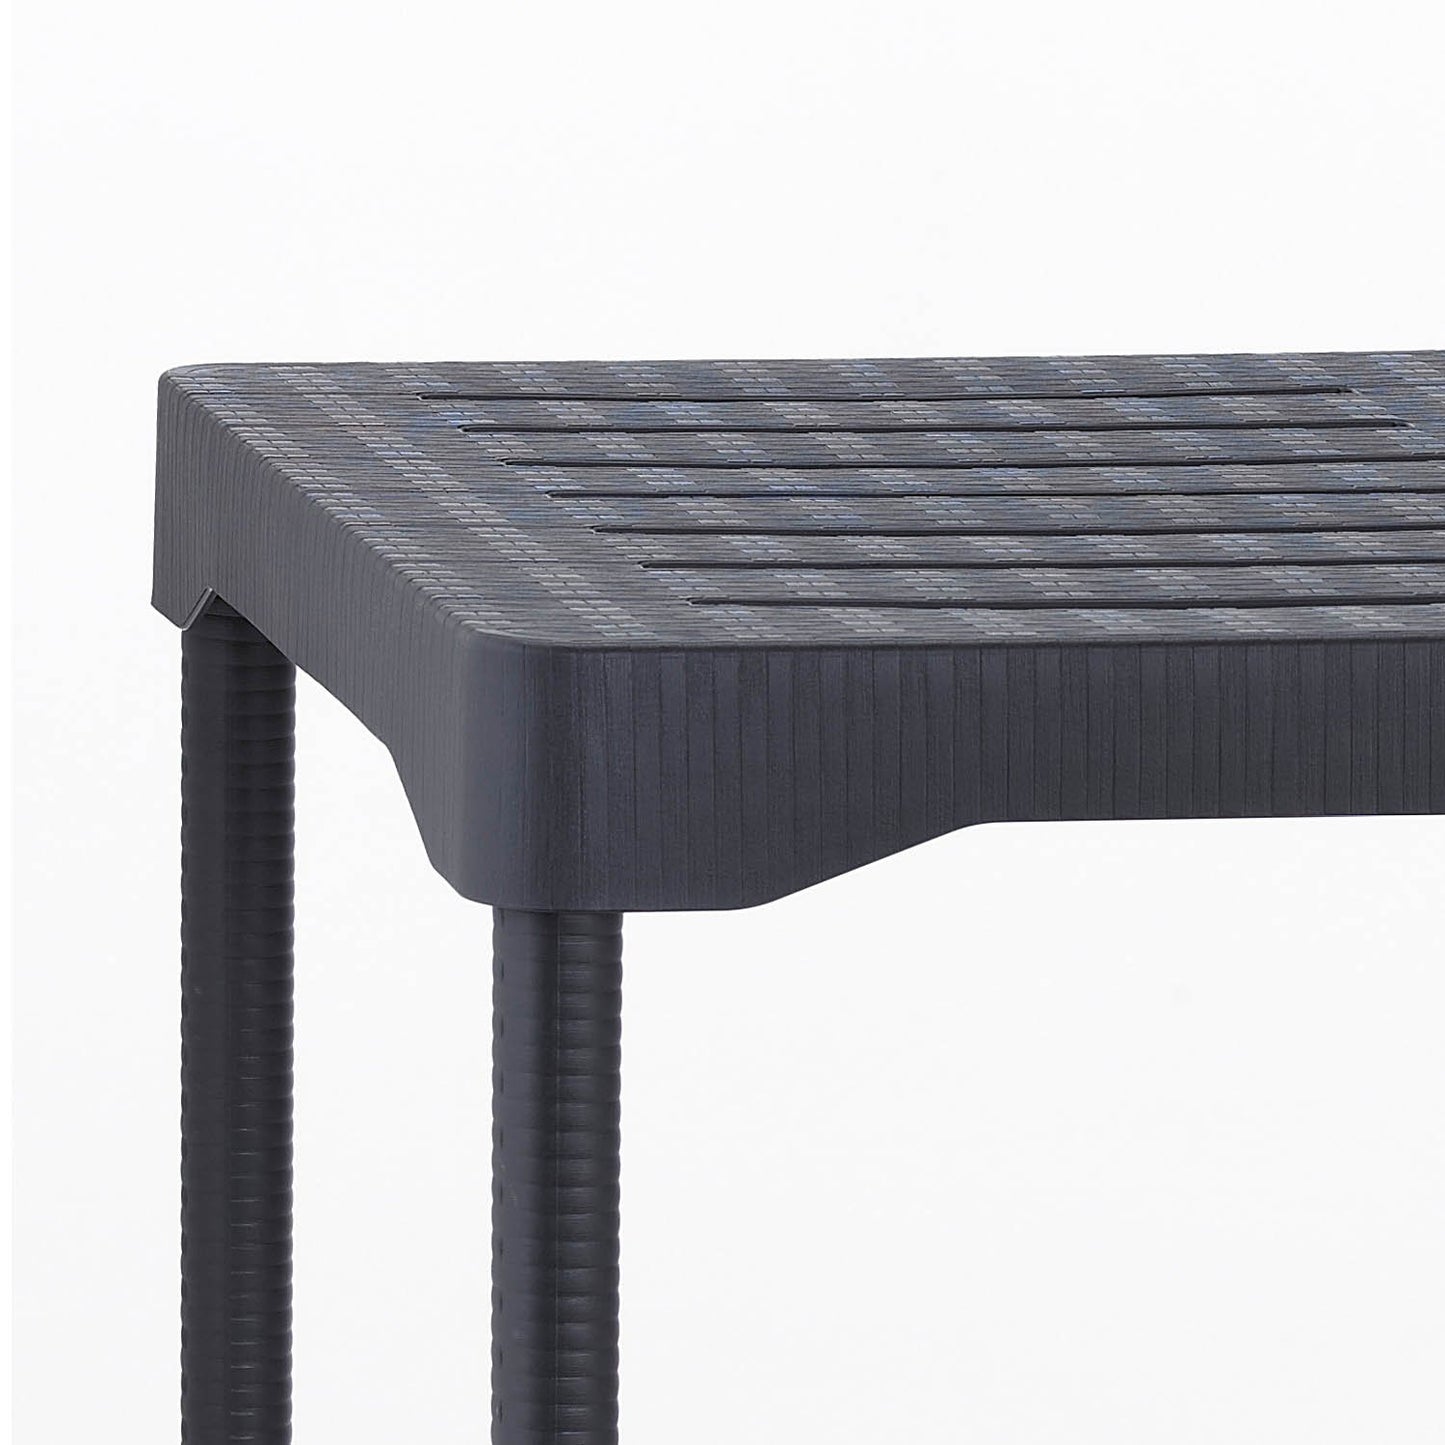 Olly technopoly garden side table by Scab Design - myitalianliving